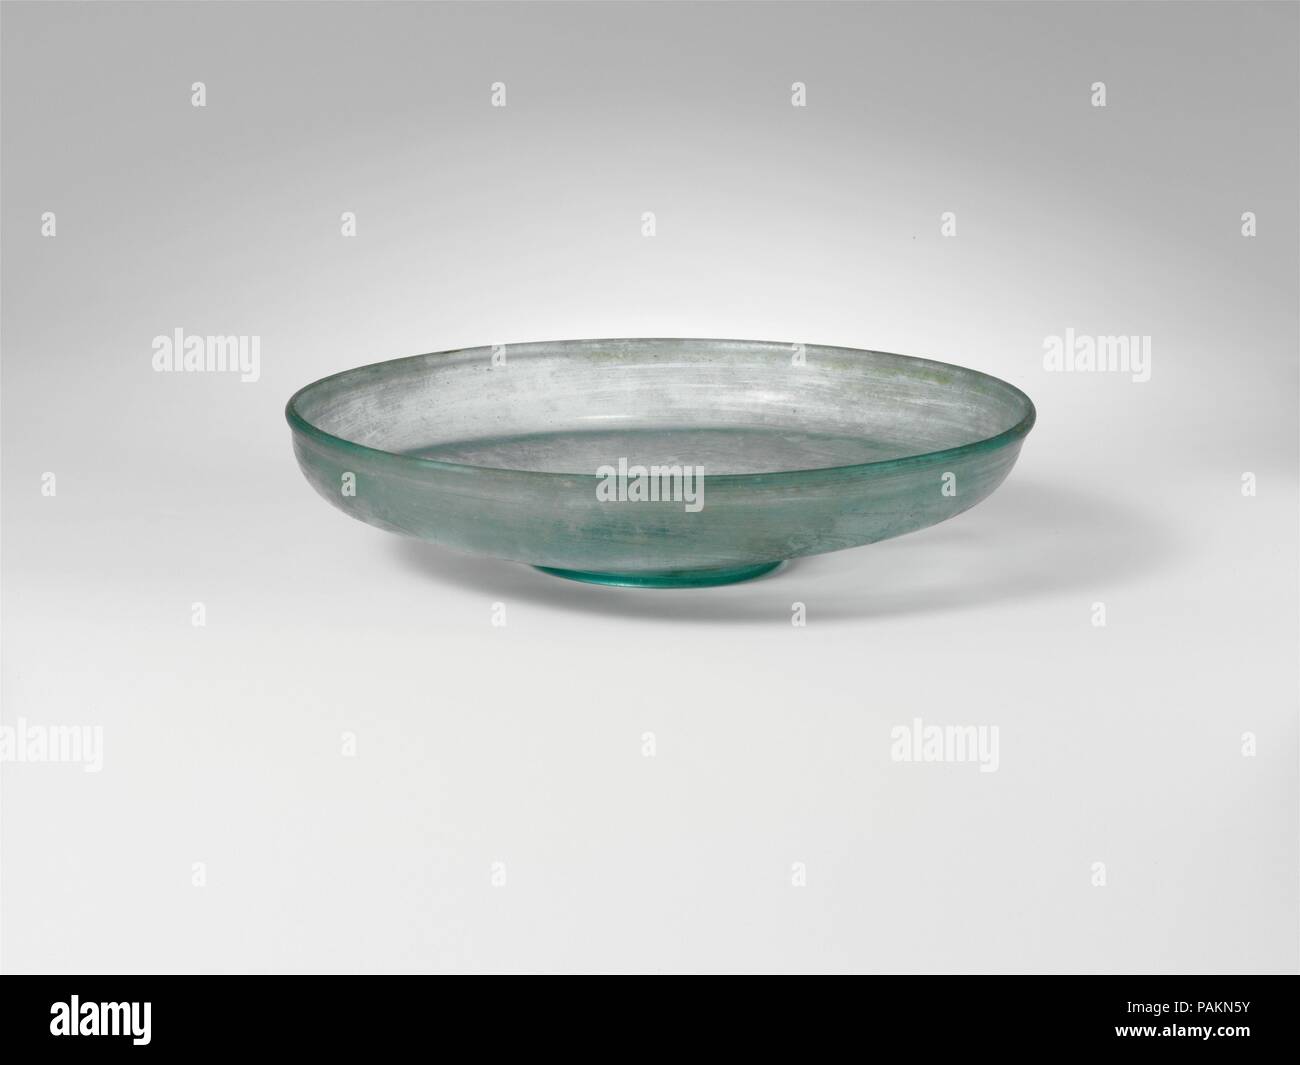 Glass dish. Culture: Roman. Dimensions: H. 1 1/4 in. (3.2 cm)  diameter  5 5/8 in. (14.3 cm). Date: 4th century A.D..  Translucent blue green.  Vertical, slightly thickened, rounded rim; short, convex side to body,  turned in horizontally, and then sloping inwards to thick, flat bottom with upward kick inside and central pontil scar, surrounded by tubular base ring.   Intact; many pinprick bubbles and blowing striations; dulling and faint iridescence. Museum: Metropolitan Museum of Art, New York, USA. Stock Photo